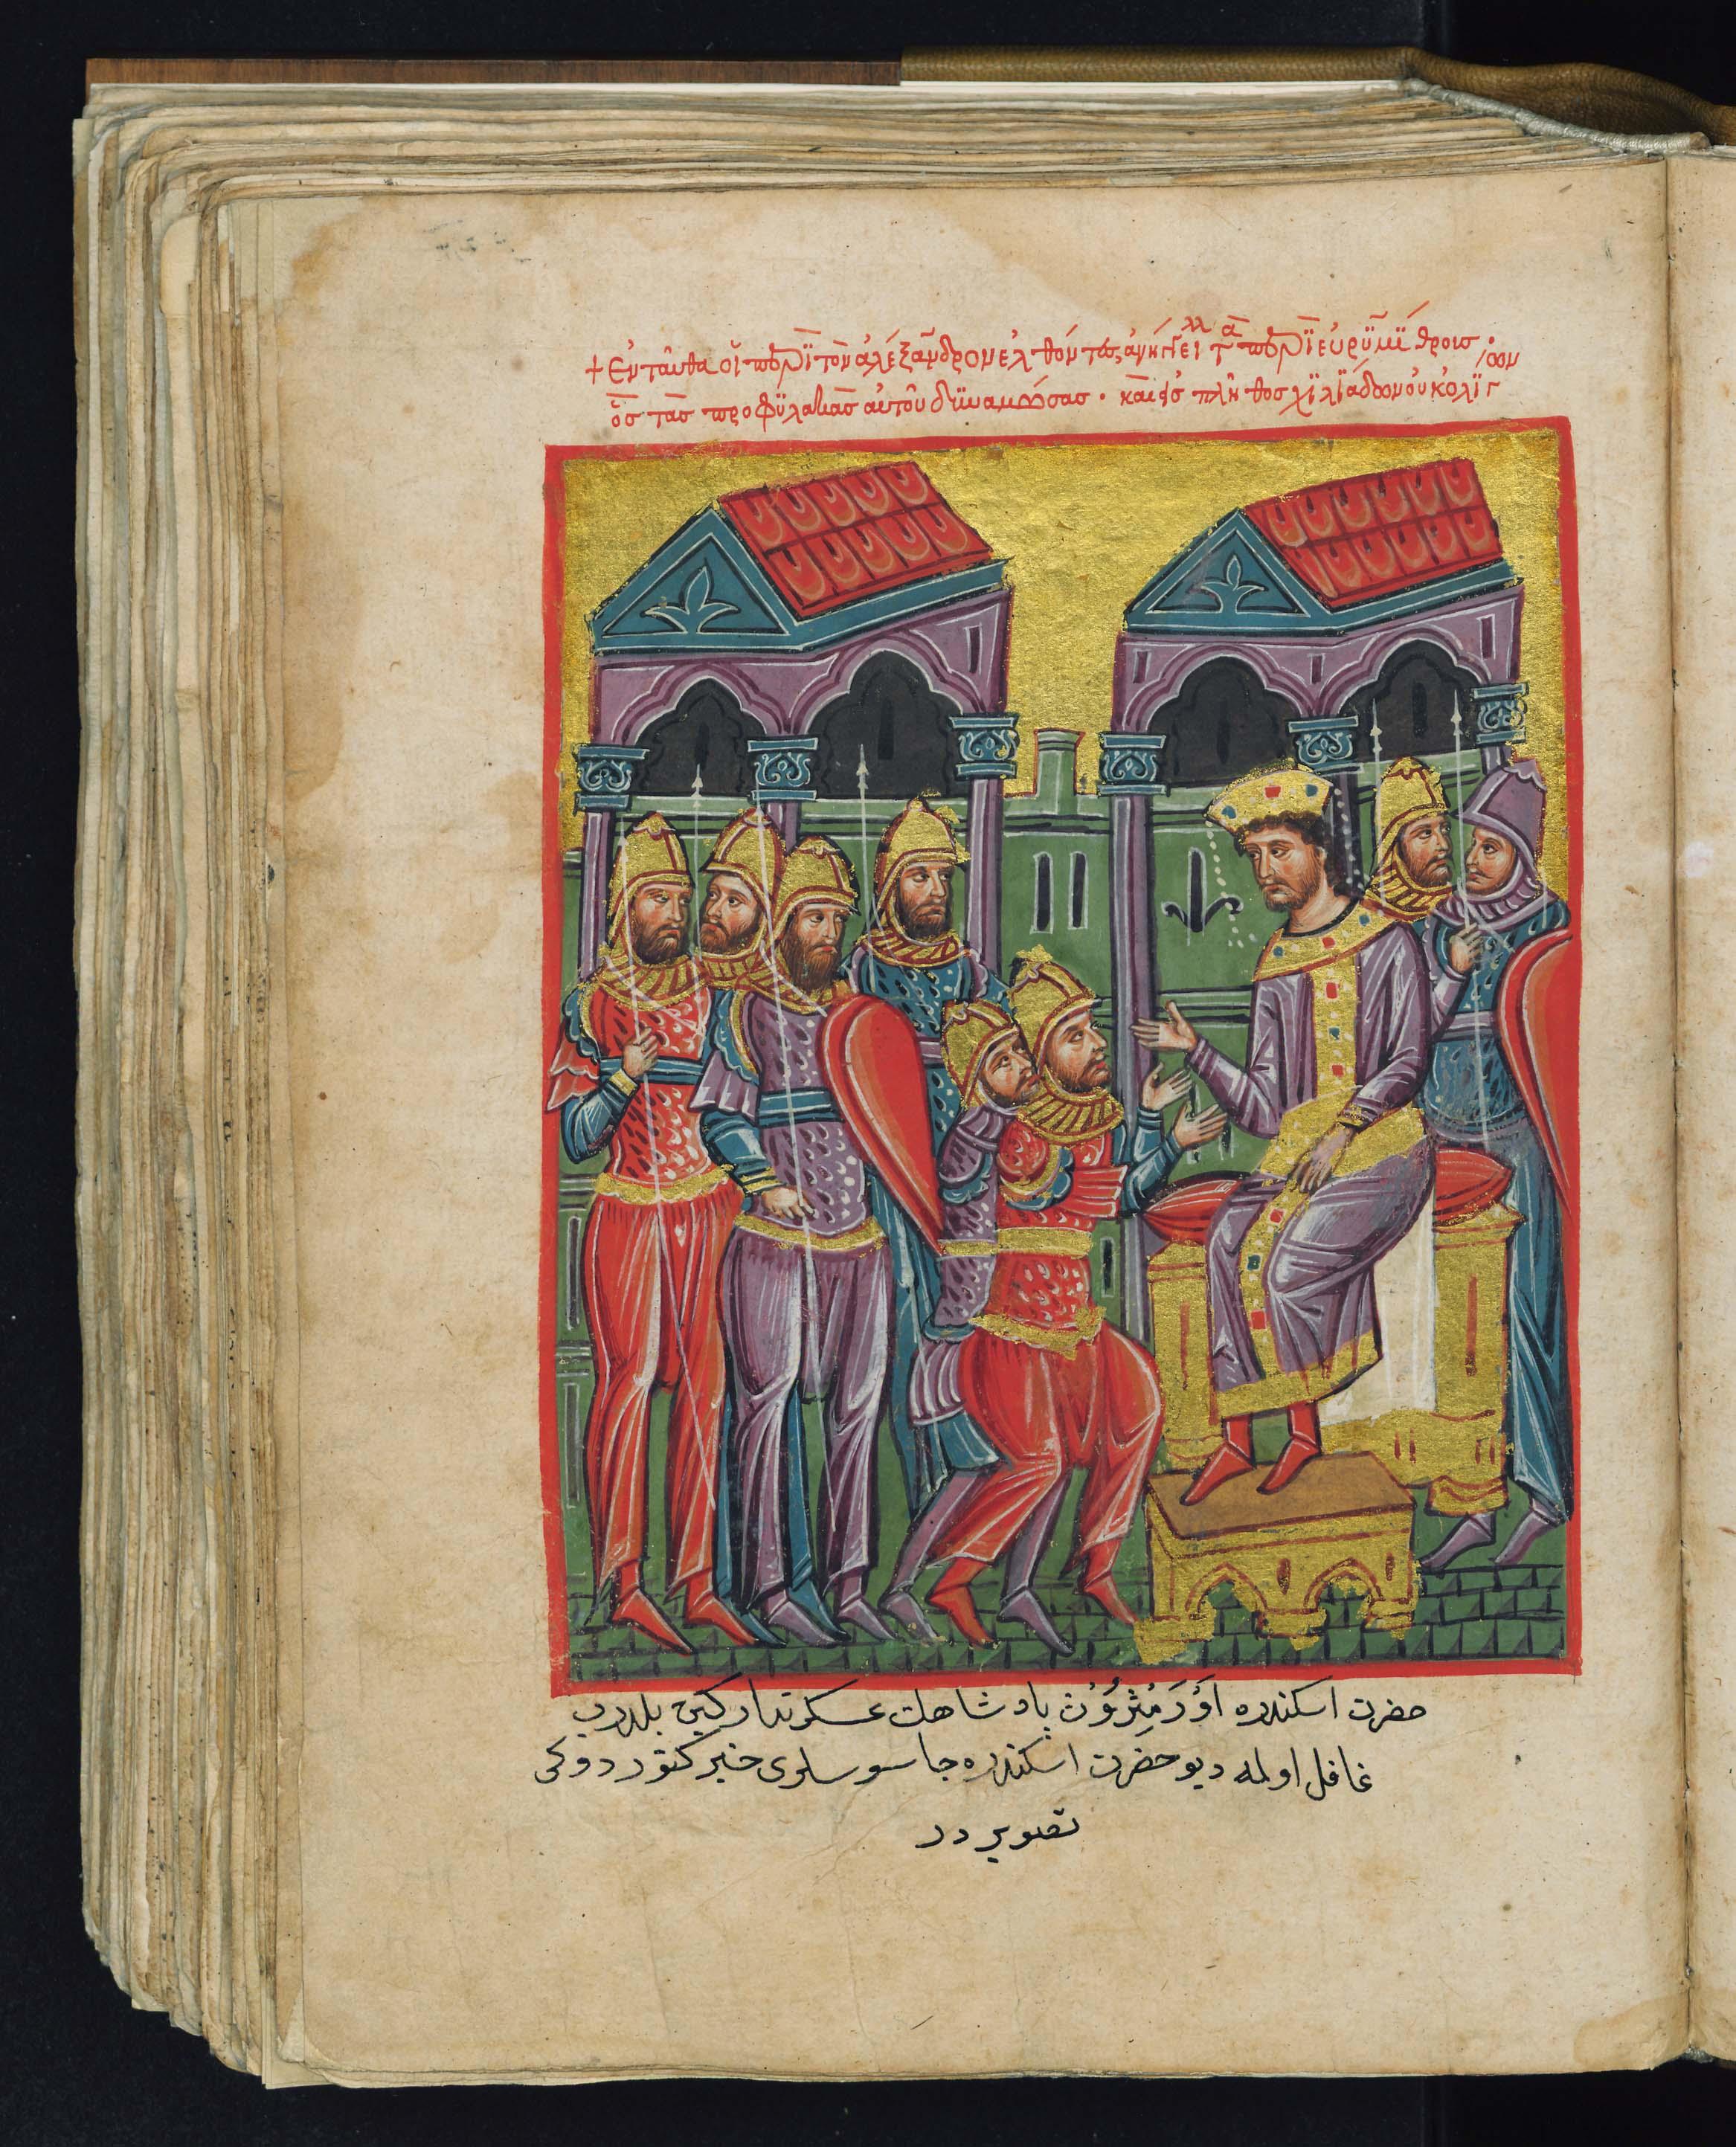 Miniature of the "Alexander Romance", a 14th-century book, late Byzantine period / Wikimedia Commons 